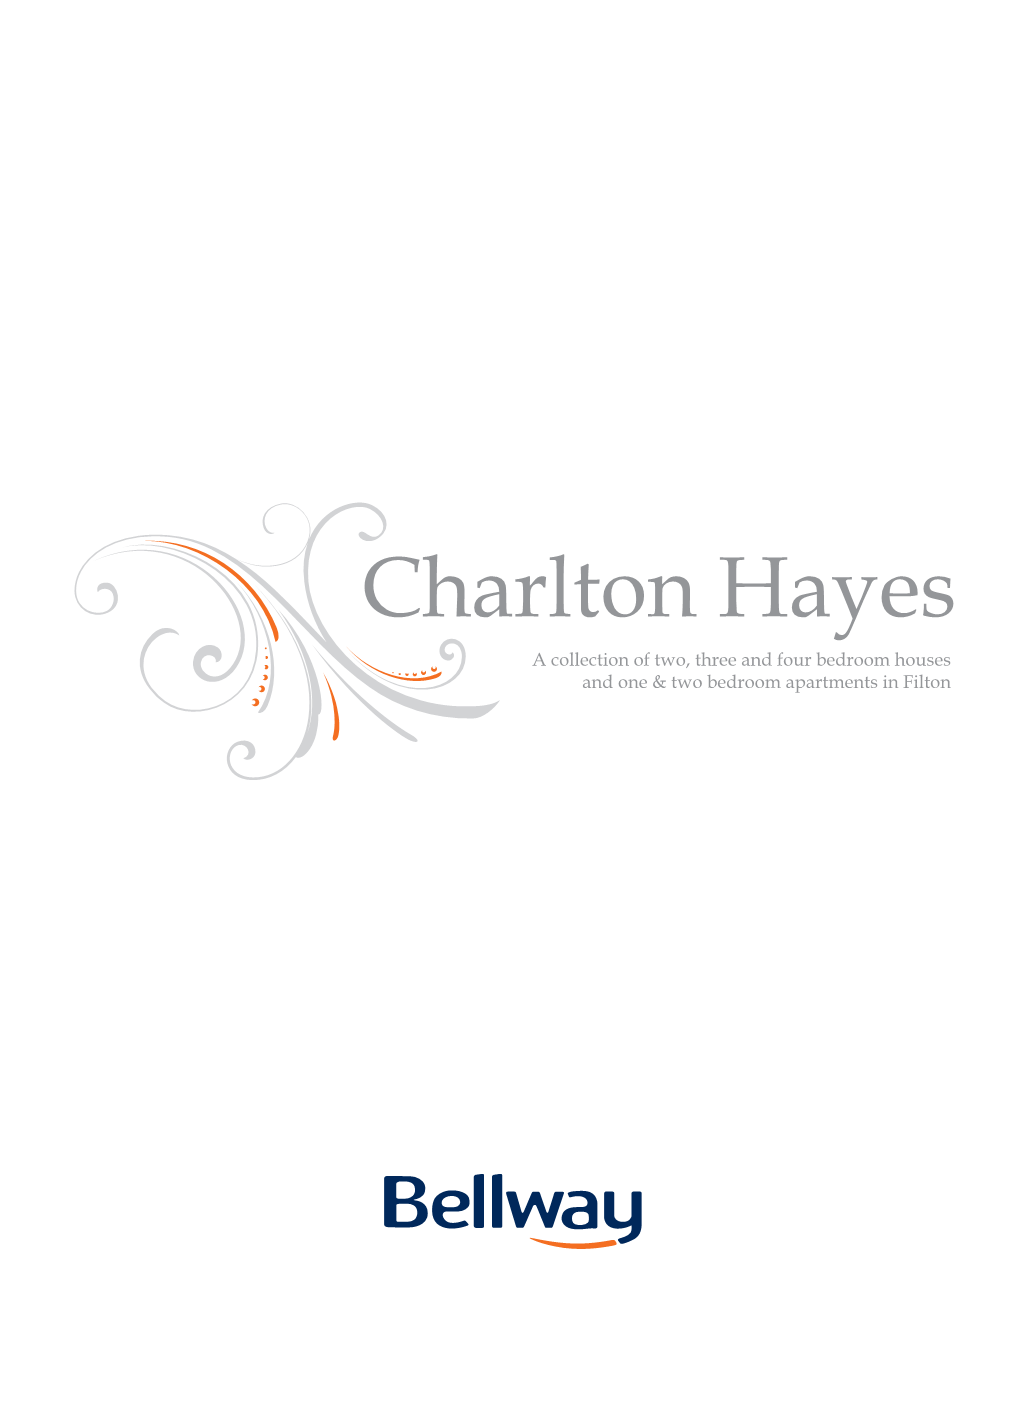 Charlton Hayes a Collection of Two, Three and Four Bedroom Houses and One & Two Bedroom Apartments in Filton a Reputation You Can Rely On